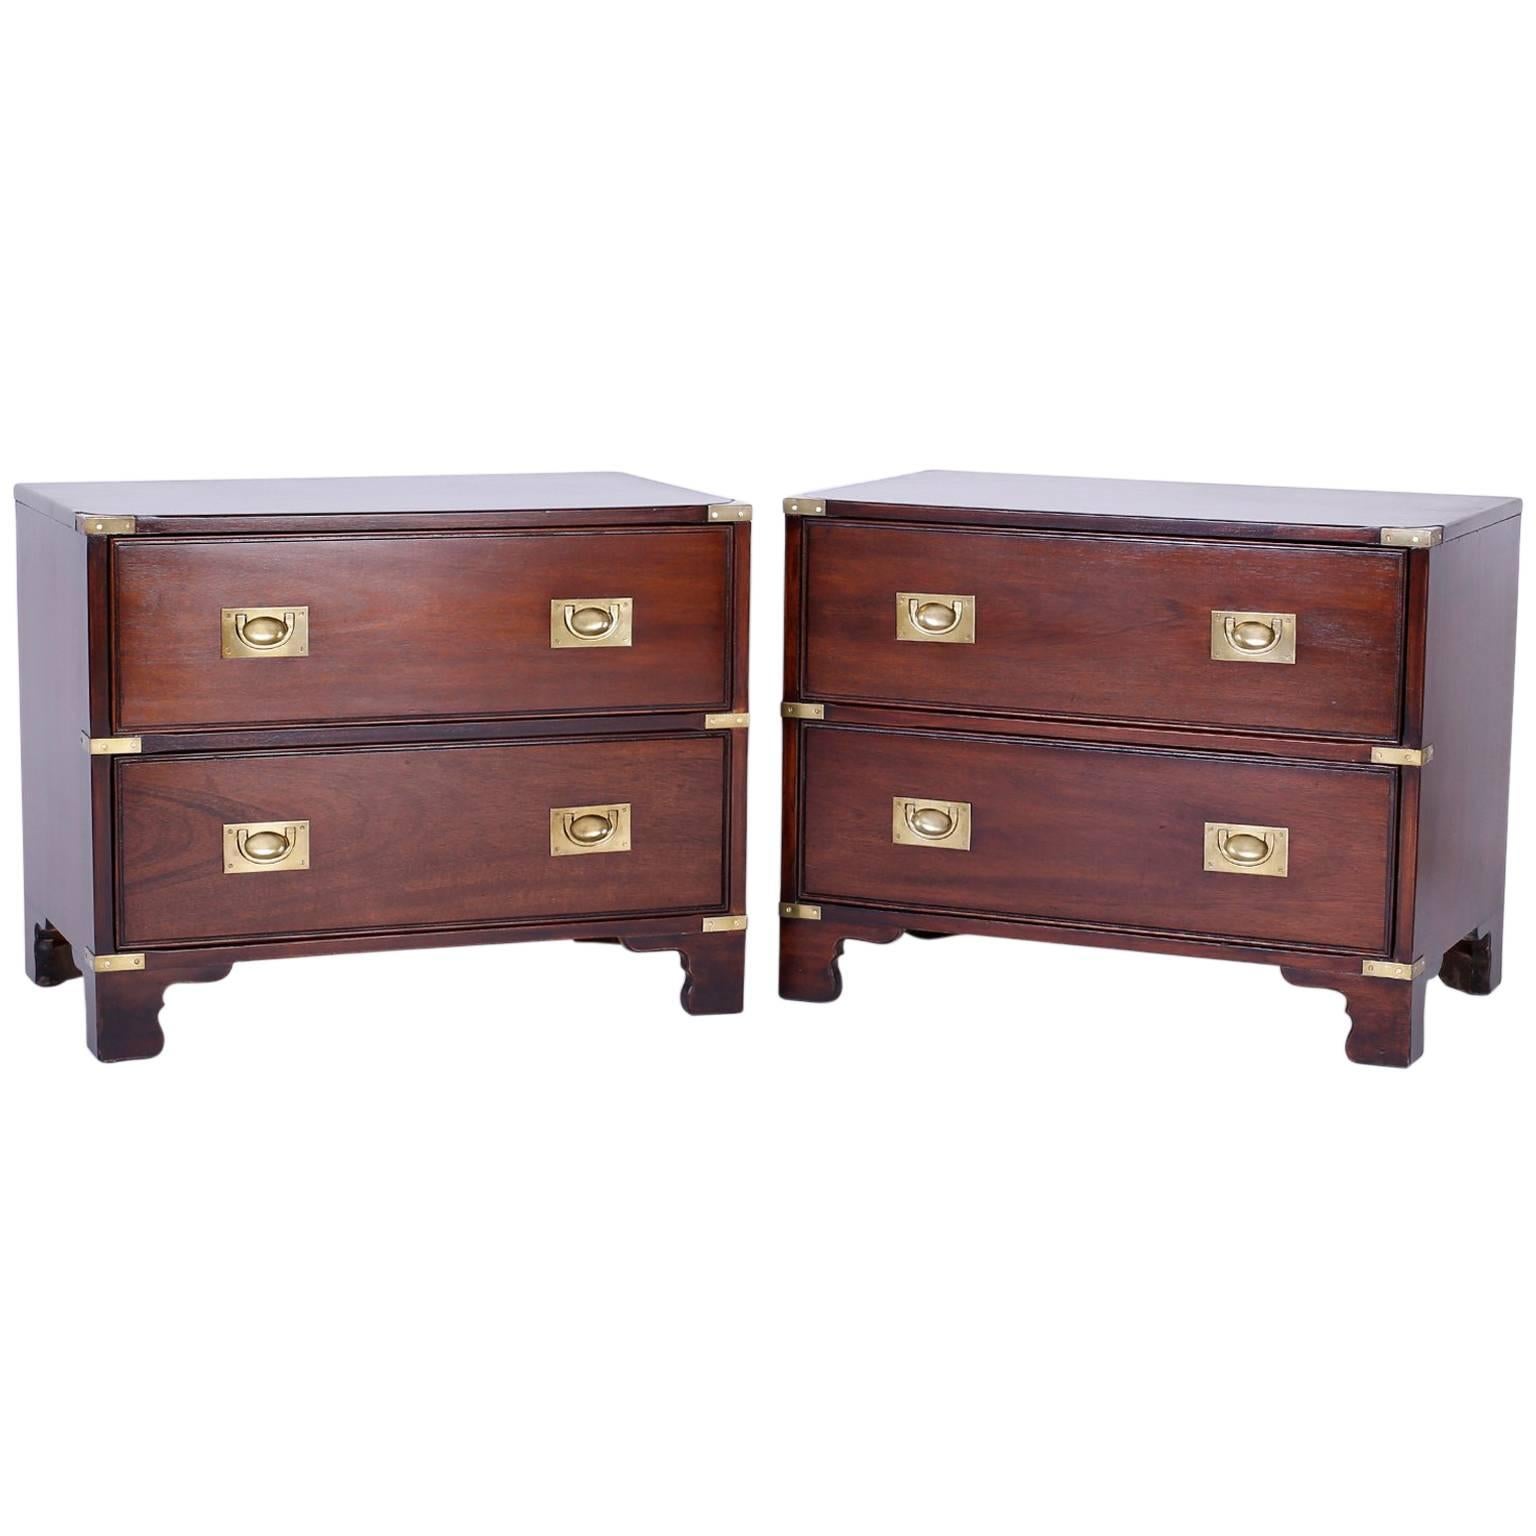 Pair of Campaign Style Mahogany Nightstands or Chests